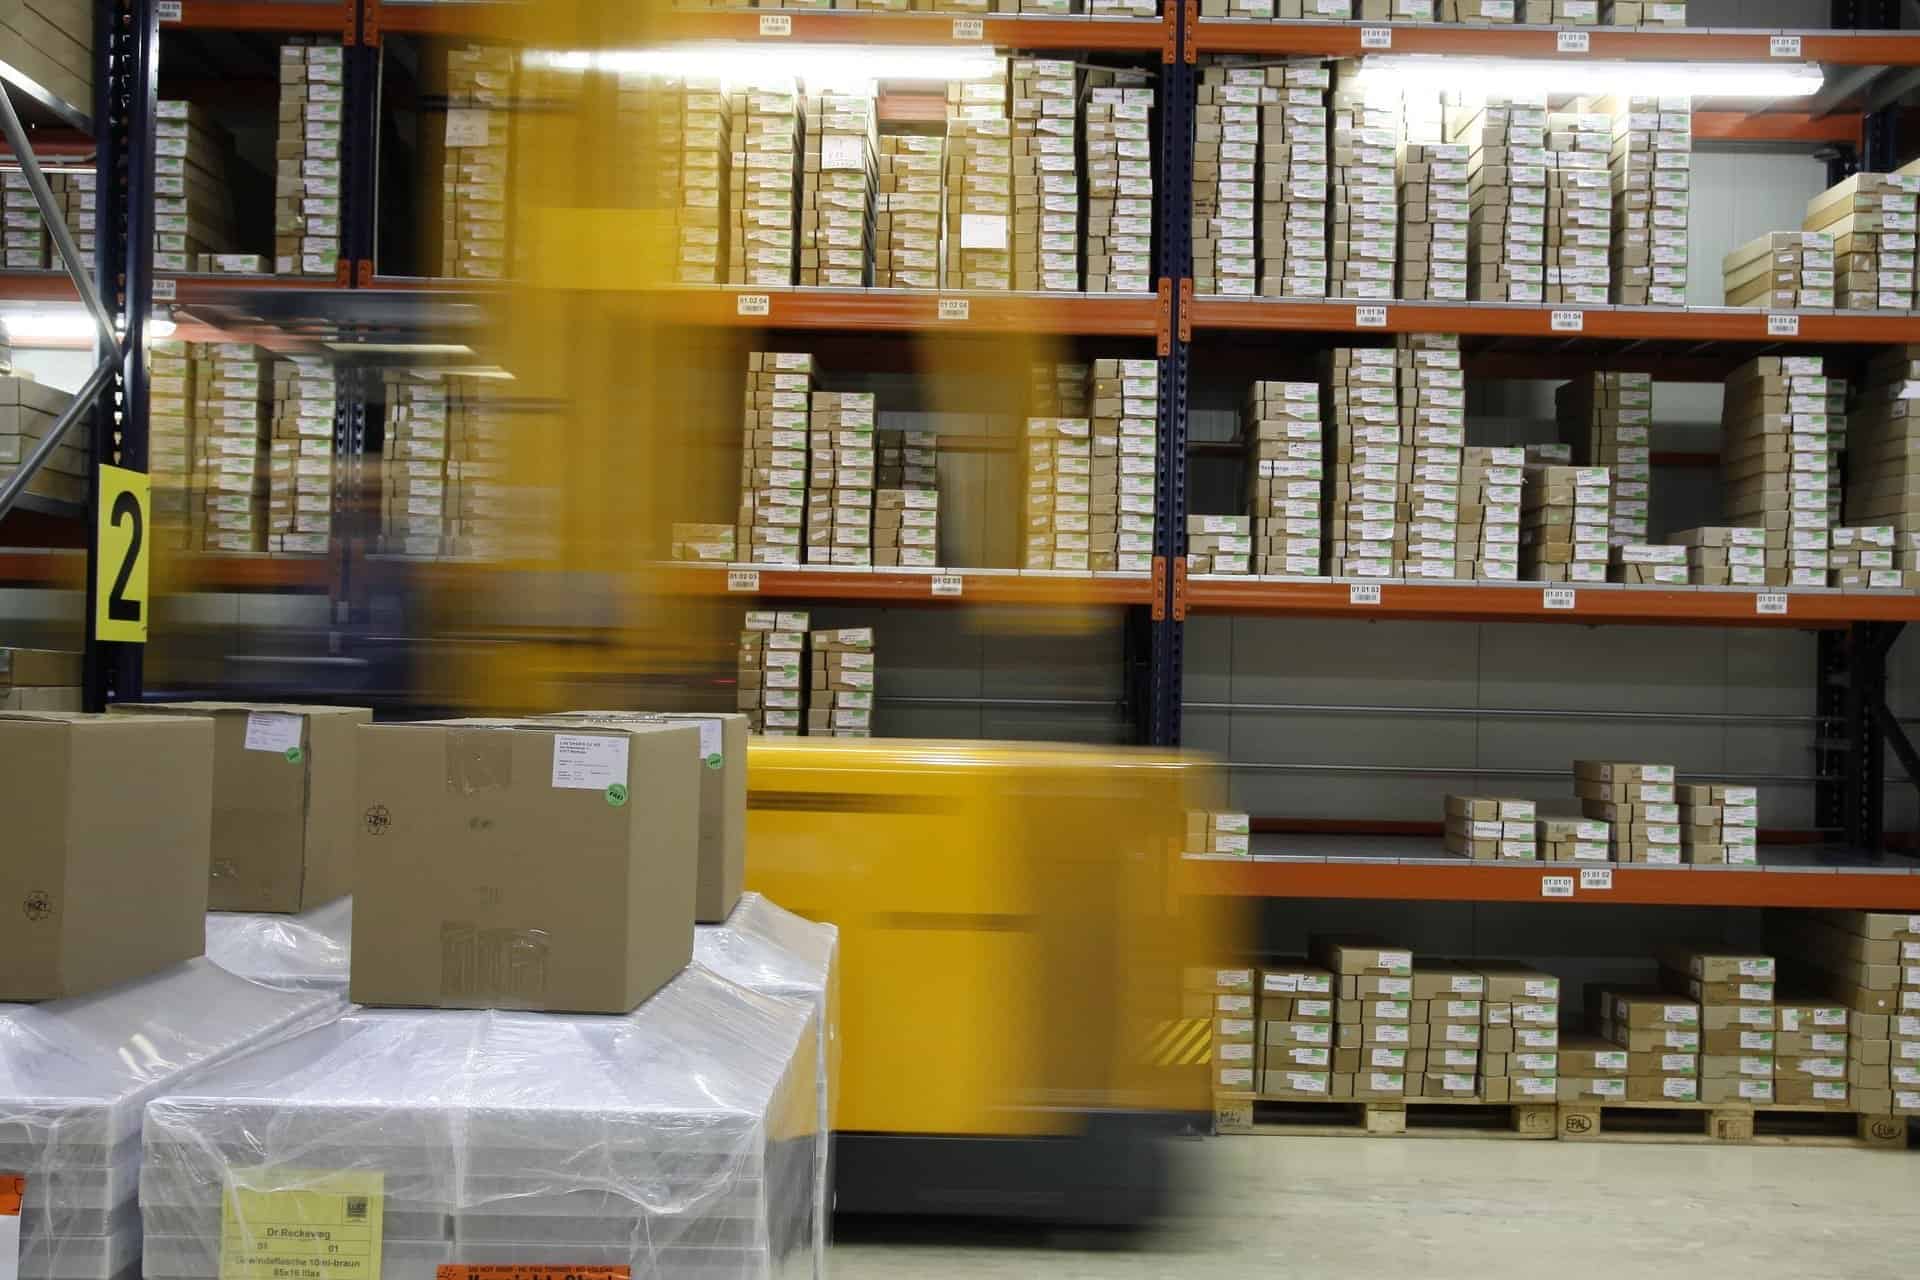 Advantages of RFID Tags Over Barcodes for Warehouse Management